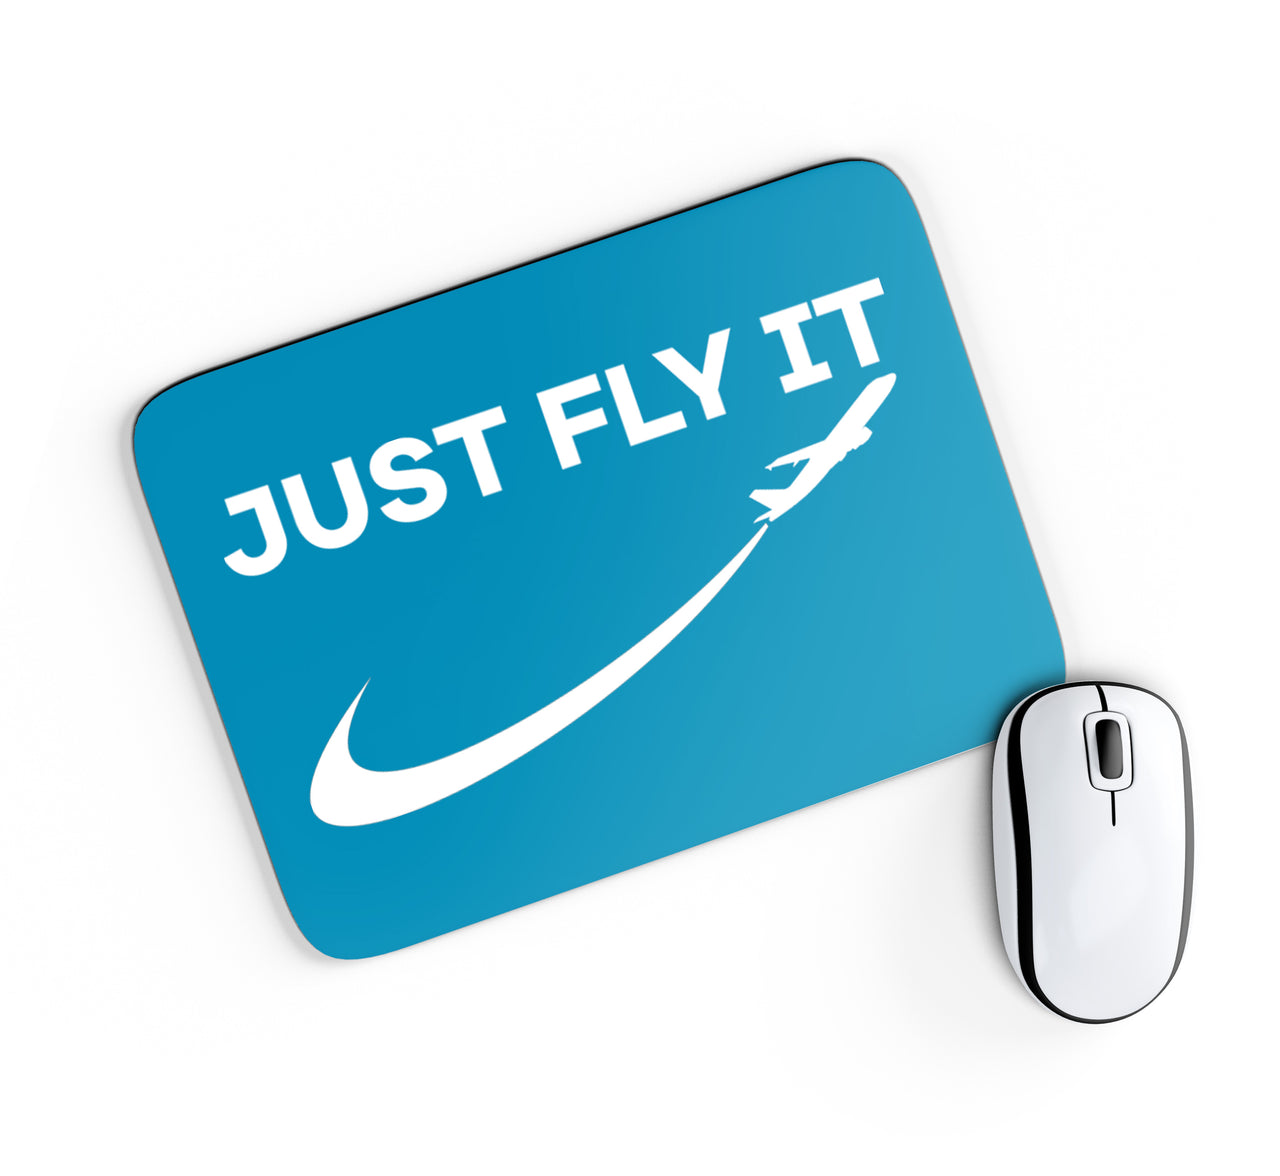 Just Fly It 2 Designed Mouse Pads